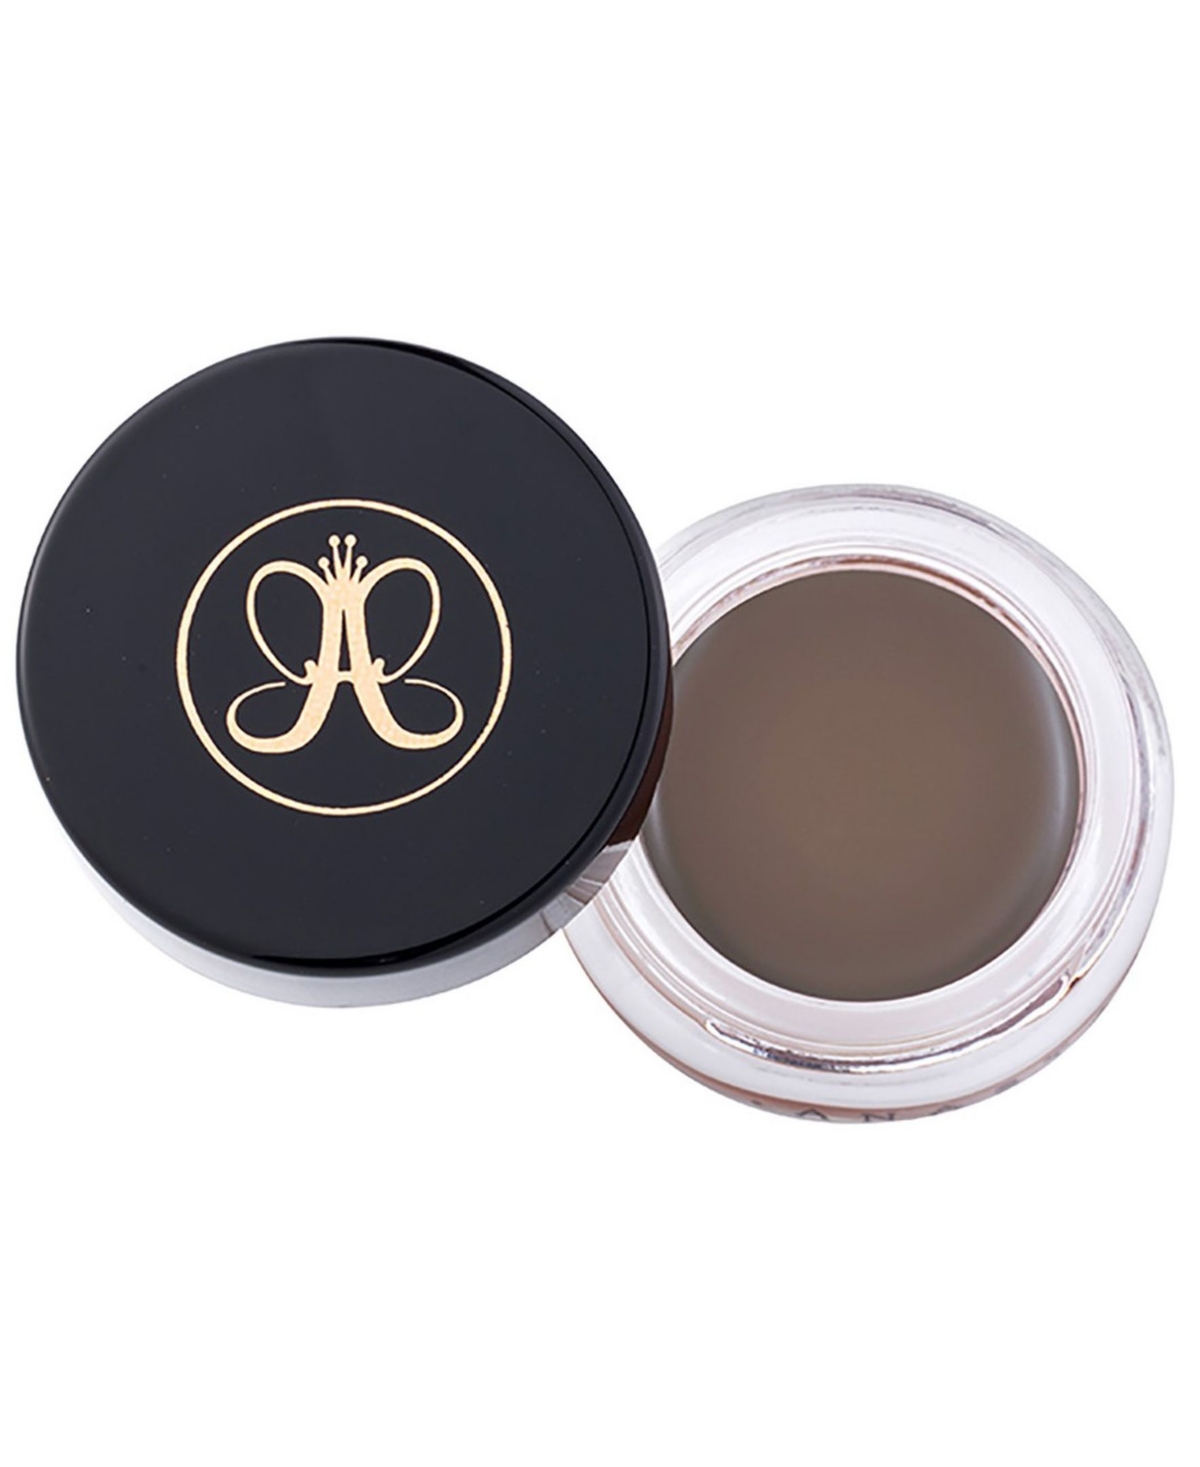 Anastasia Beverly Hills Dipbrow Pomade In Taupe (blonde Hair With Cool,ash Underto